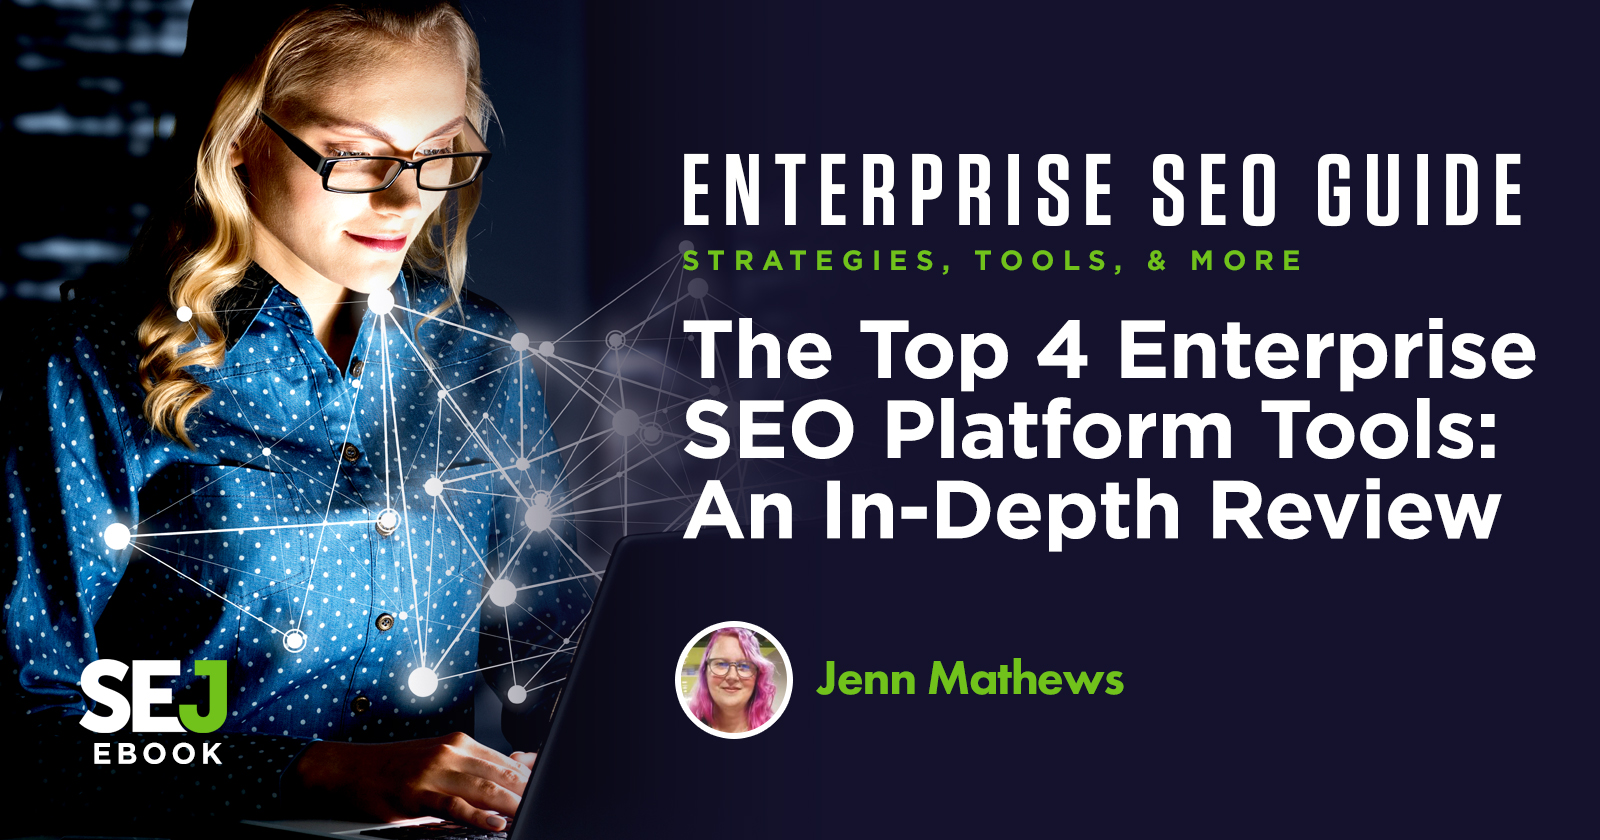 The Top 4 Enterprise SEO Platform Tools - An In-Depth Review